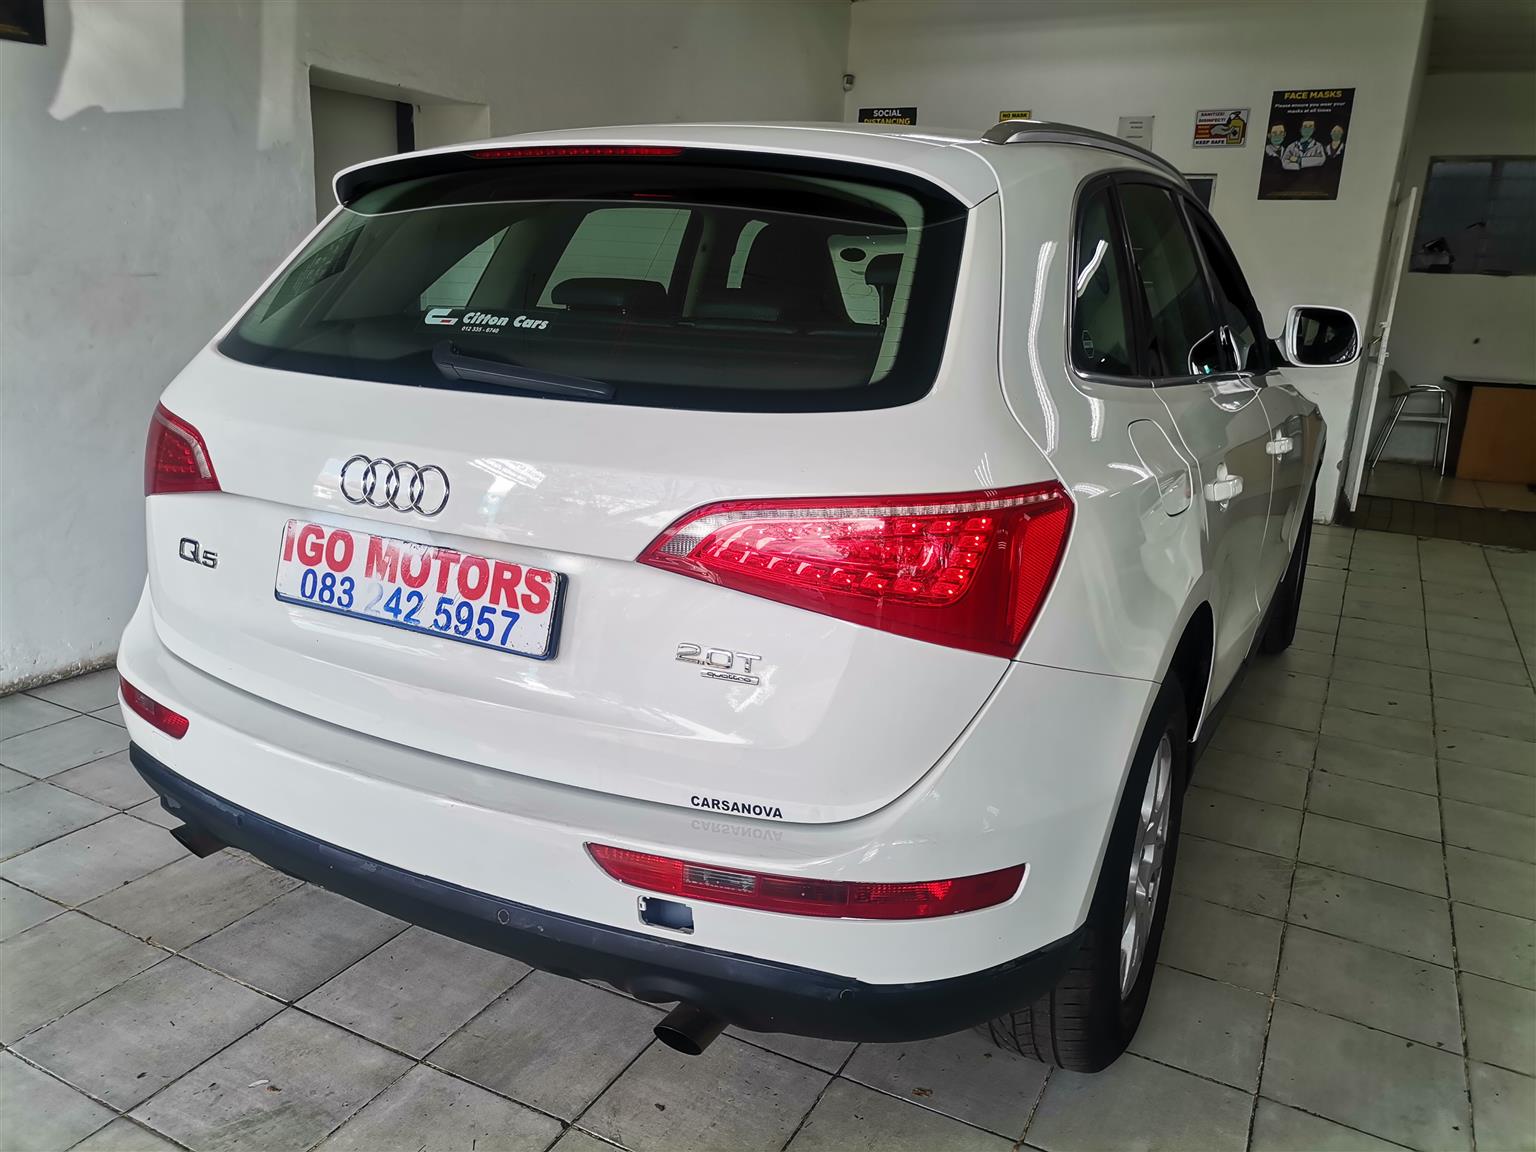 2011 Audi Q5 2.0TFSi Auto 105000km R130000 Mechanicaly perfect with Leather Seat